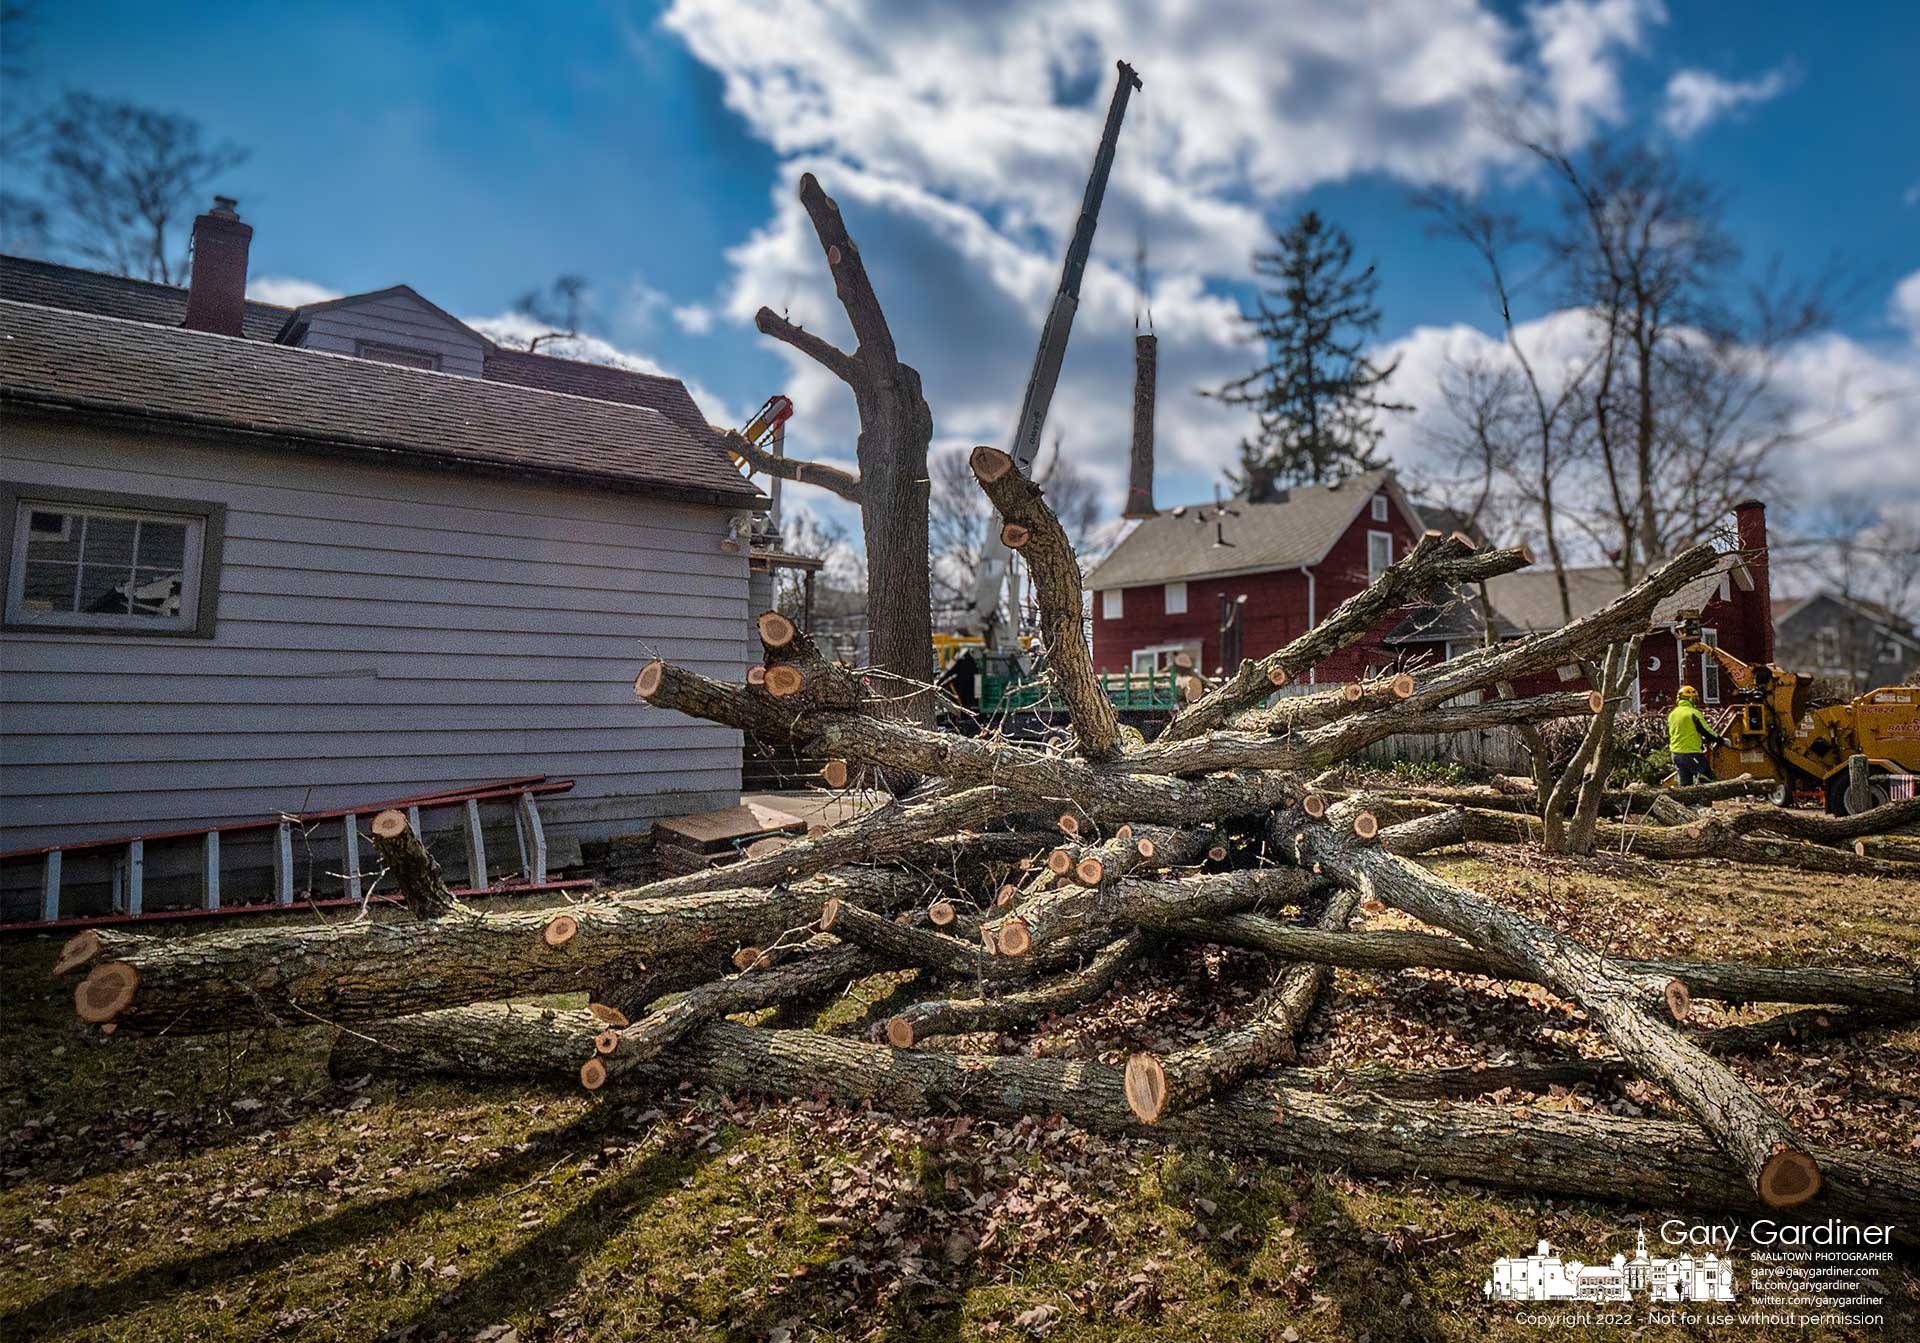 A tangle of limbs from a large oak tree is temporarily stacked in the backyard of a house at the corner of East College and Whitehead Street after it and two other trees were removed for planned upgrades on East Home and its connecting streets. My Final Photo for March 9, 2022.